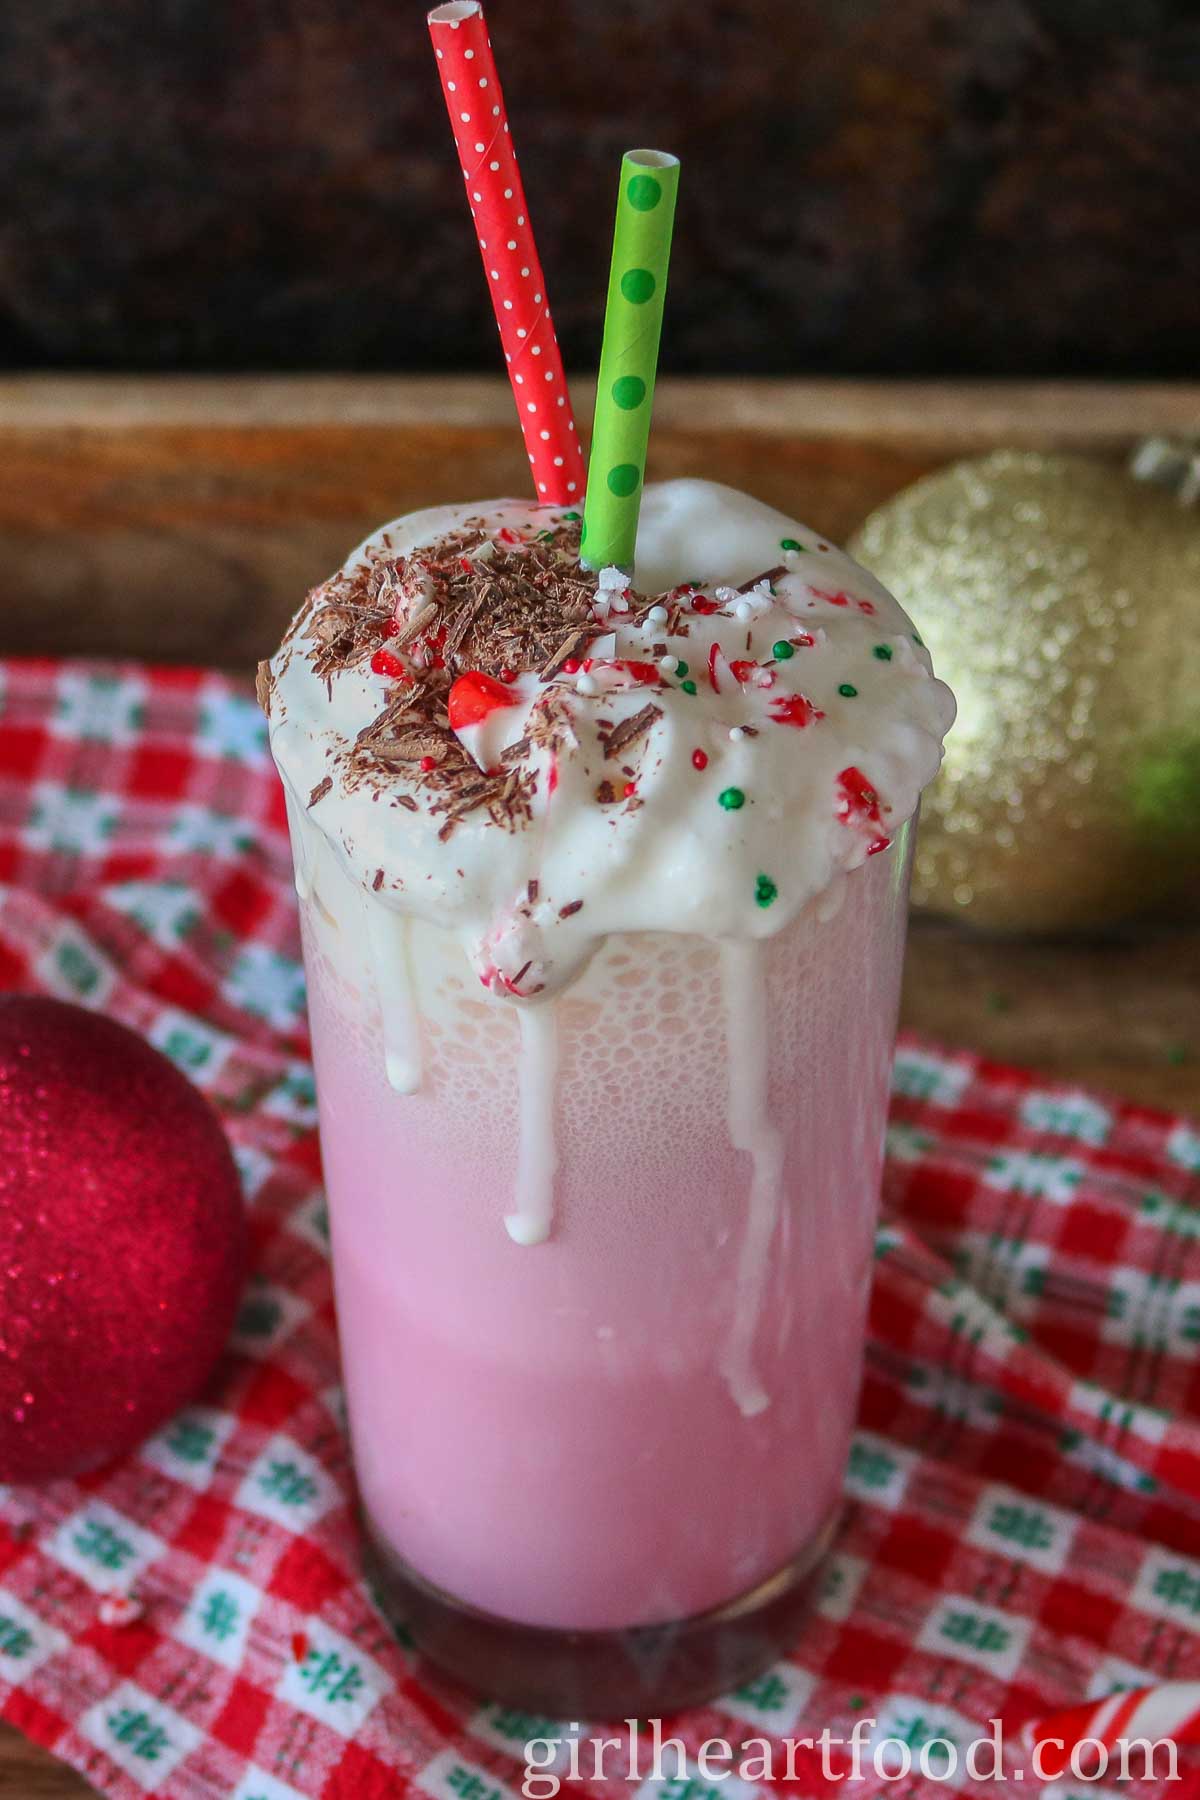 Glass of pink candy cane milkshake with milkshake spilling out over the top and down the glass.